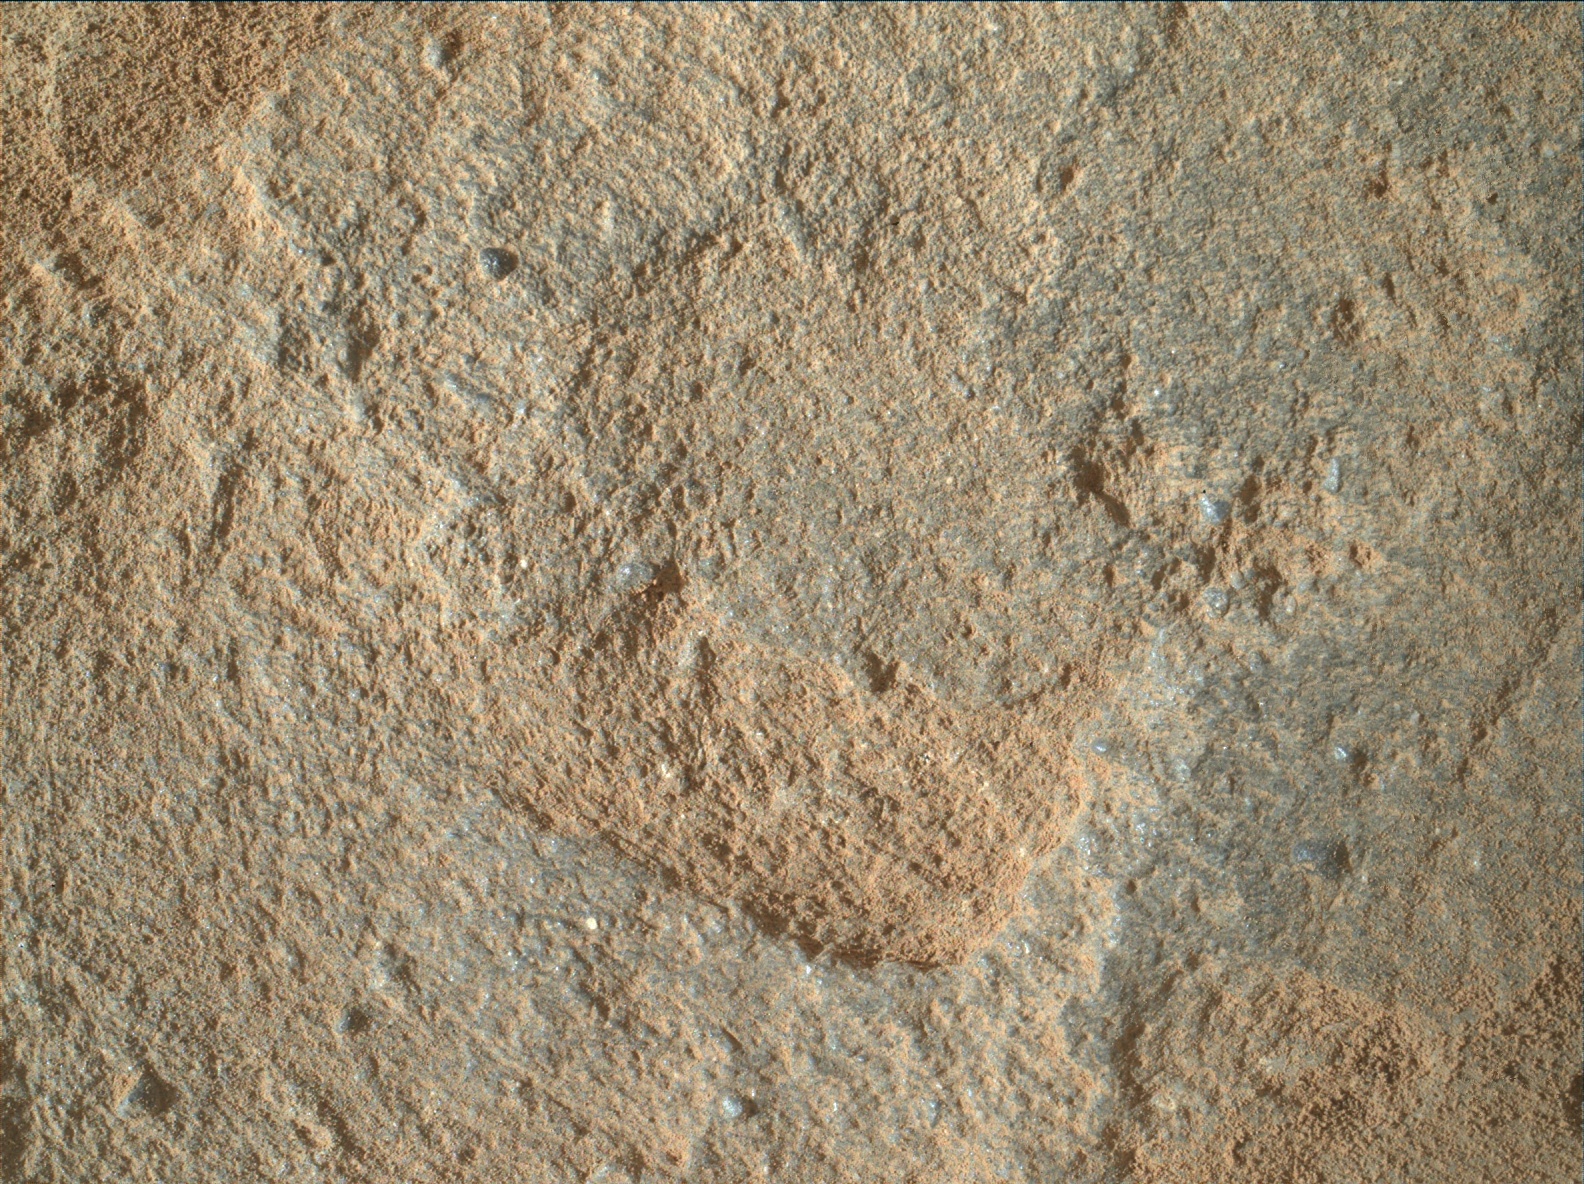 Nasa's Mars rover Curiosity acquired this image using its Mars Hand Lens Imager (MAHLI) on Sol 1114